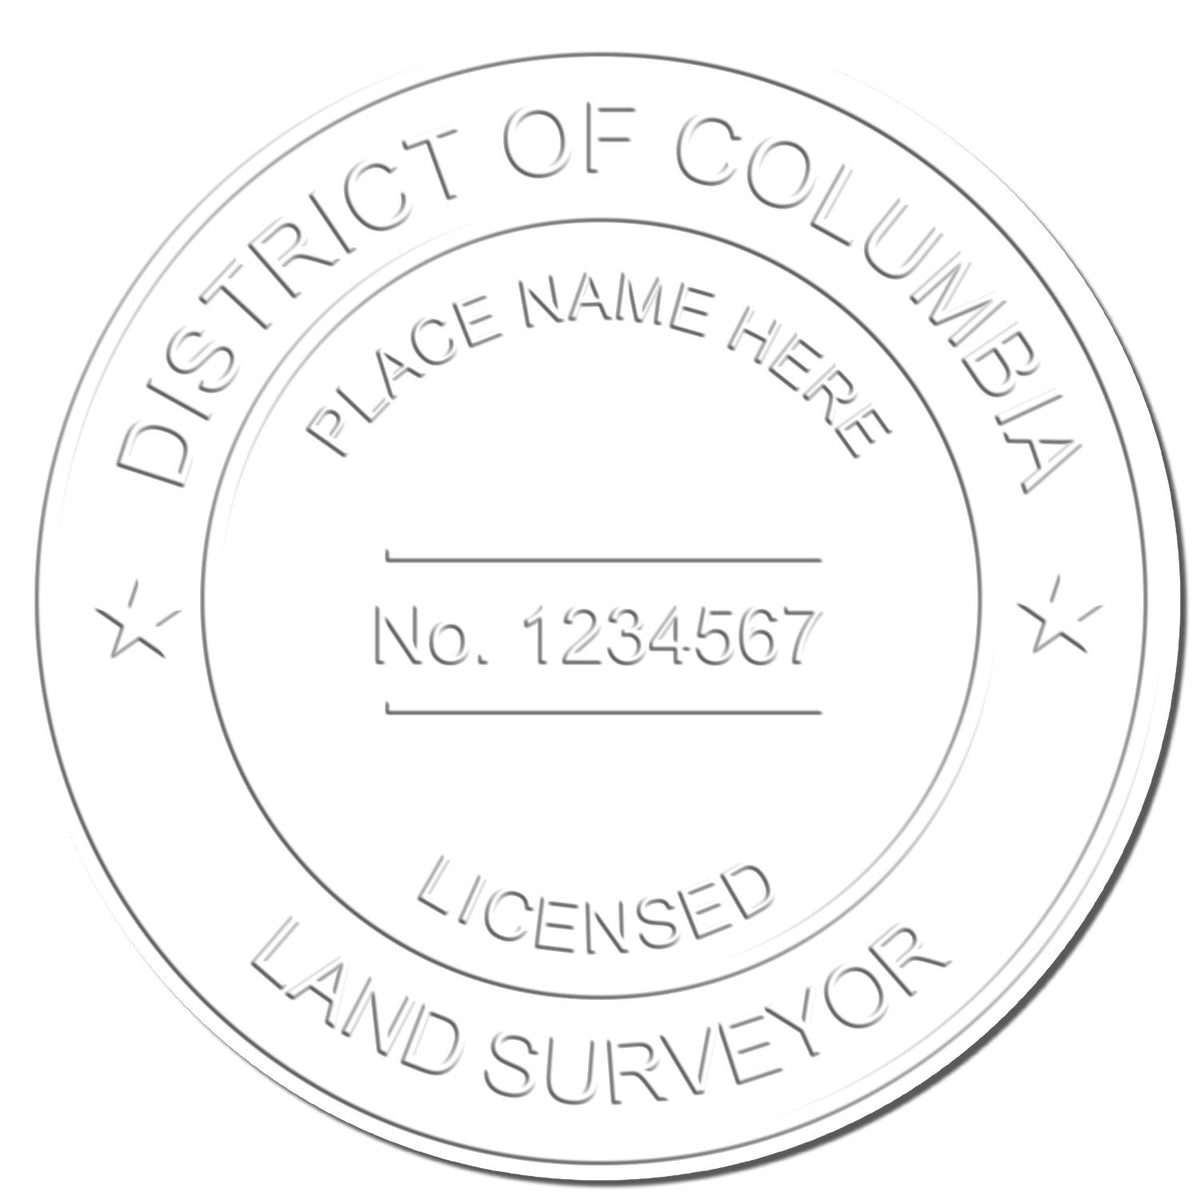 This paper is stamped with a sample imprint of the Handheld District of Columbia Land Surveyor Seal, signifying its quality and reliability.